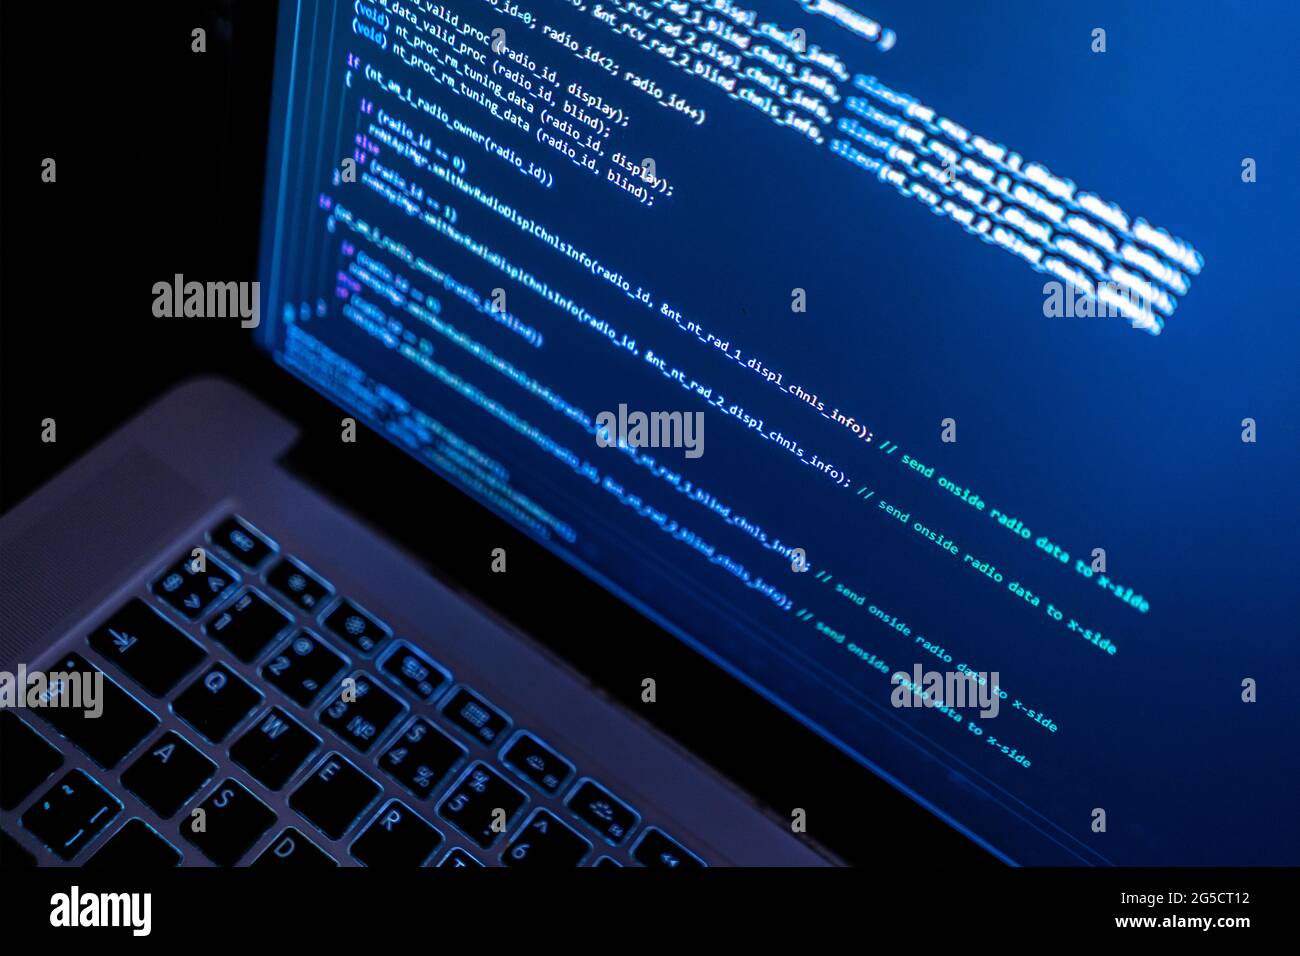 Desktop Source Code and Wallpaper by Computer Language with Coding and  Programming. Stock Image - Image of java, desktop: 125215647